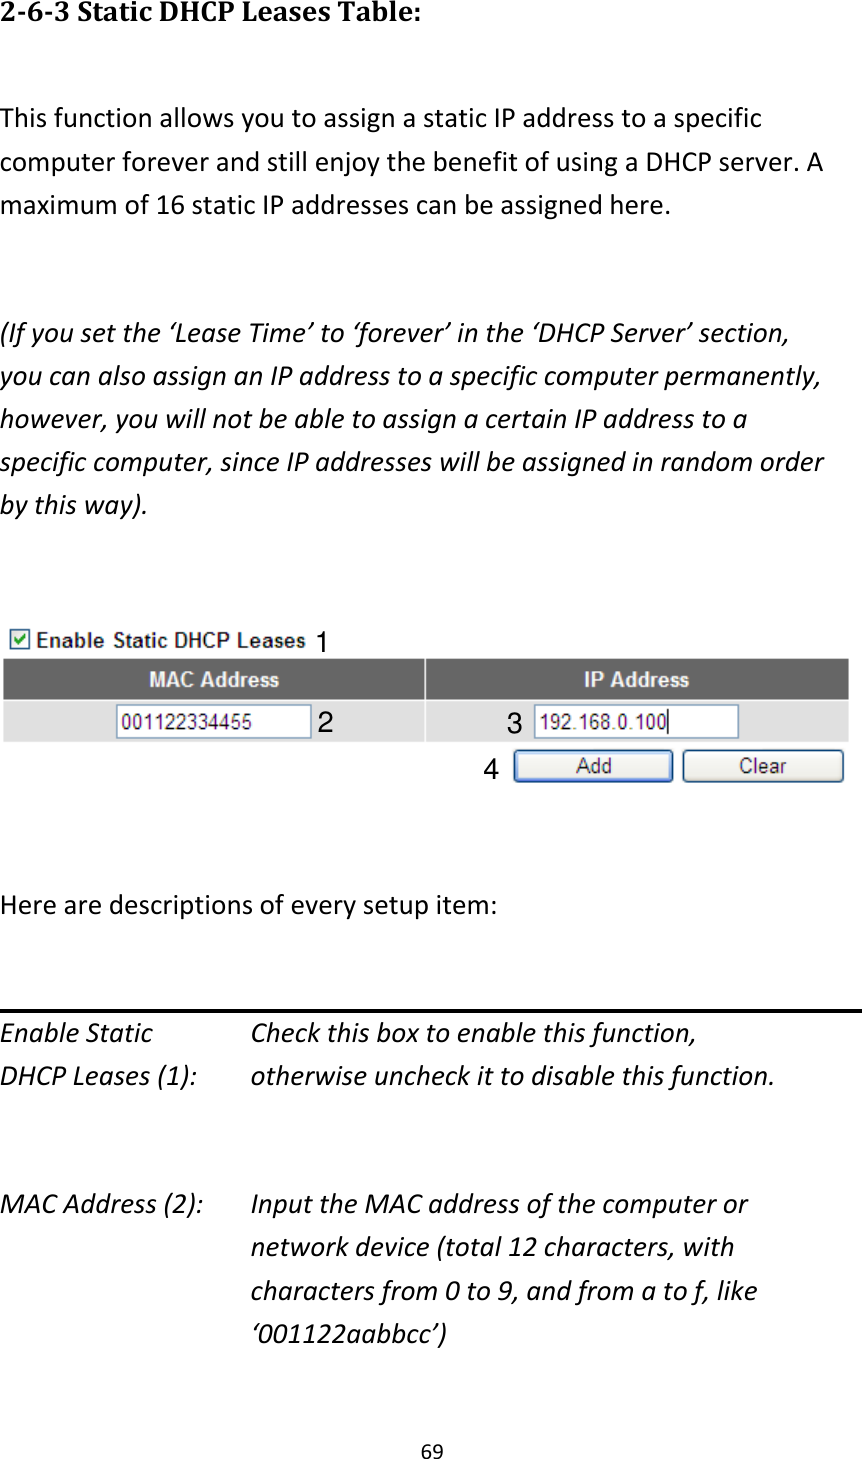 69 2-6-3 Static DHCP Leases Table:  This function allows you to assign a static IP address to a specific computer forever and still enjoy the benefit of using a DHCP server. A maximum of 16 static IP addresses can be assigned here.  (If you set the ‘Lease Time’ to ‘forever’ in the ‘DHCP Server’ section, you can also assign an IP address to a specific computer permanently, however, you will not be able to assign a certain IP address to a specific computer, since IP addresses will be assigned in random order by this way).      Here are descriptions of every setup item:  Enable Static      Check this box to enable this function, DHCP Leases (1):    otherwise uncheck it to disable this function.  MAC Address (2):    Input the MAC address of the computer or network device (total 12 characters, with characters from 0 to 9, and from a to f, like ‘001122aabbcc’)    1 2 3 4 